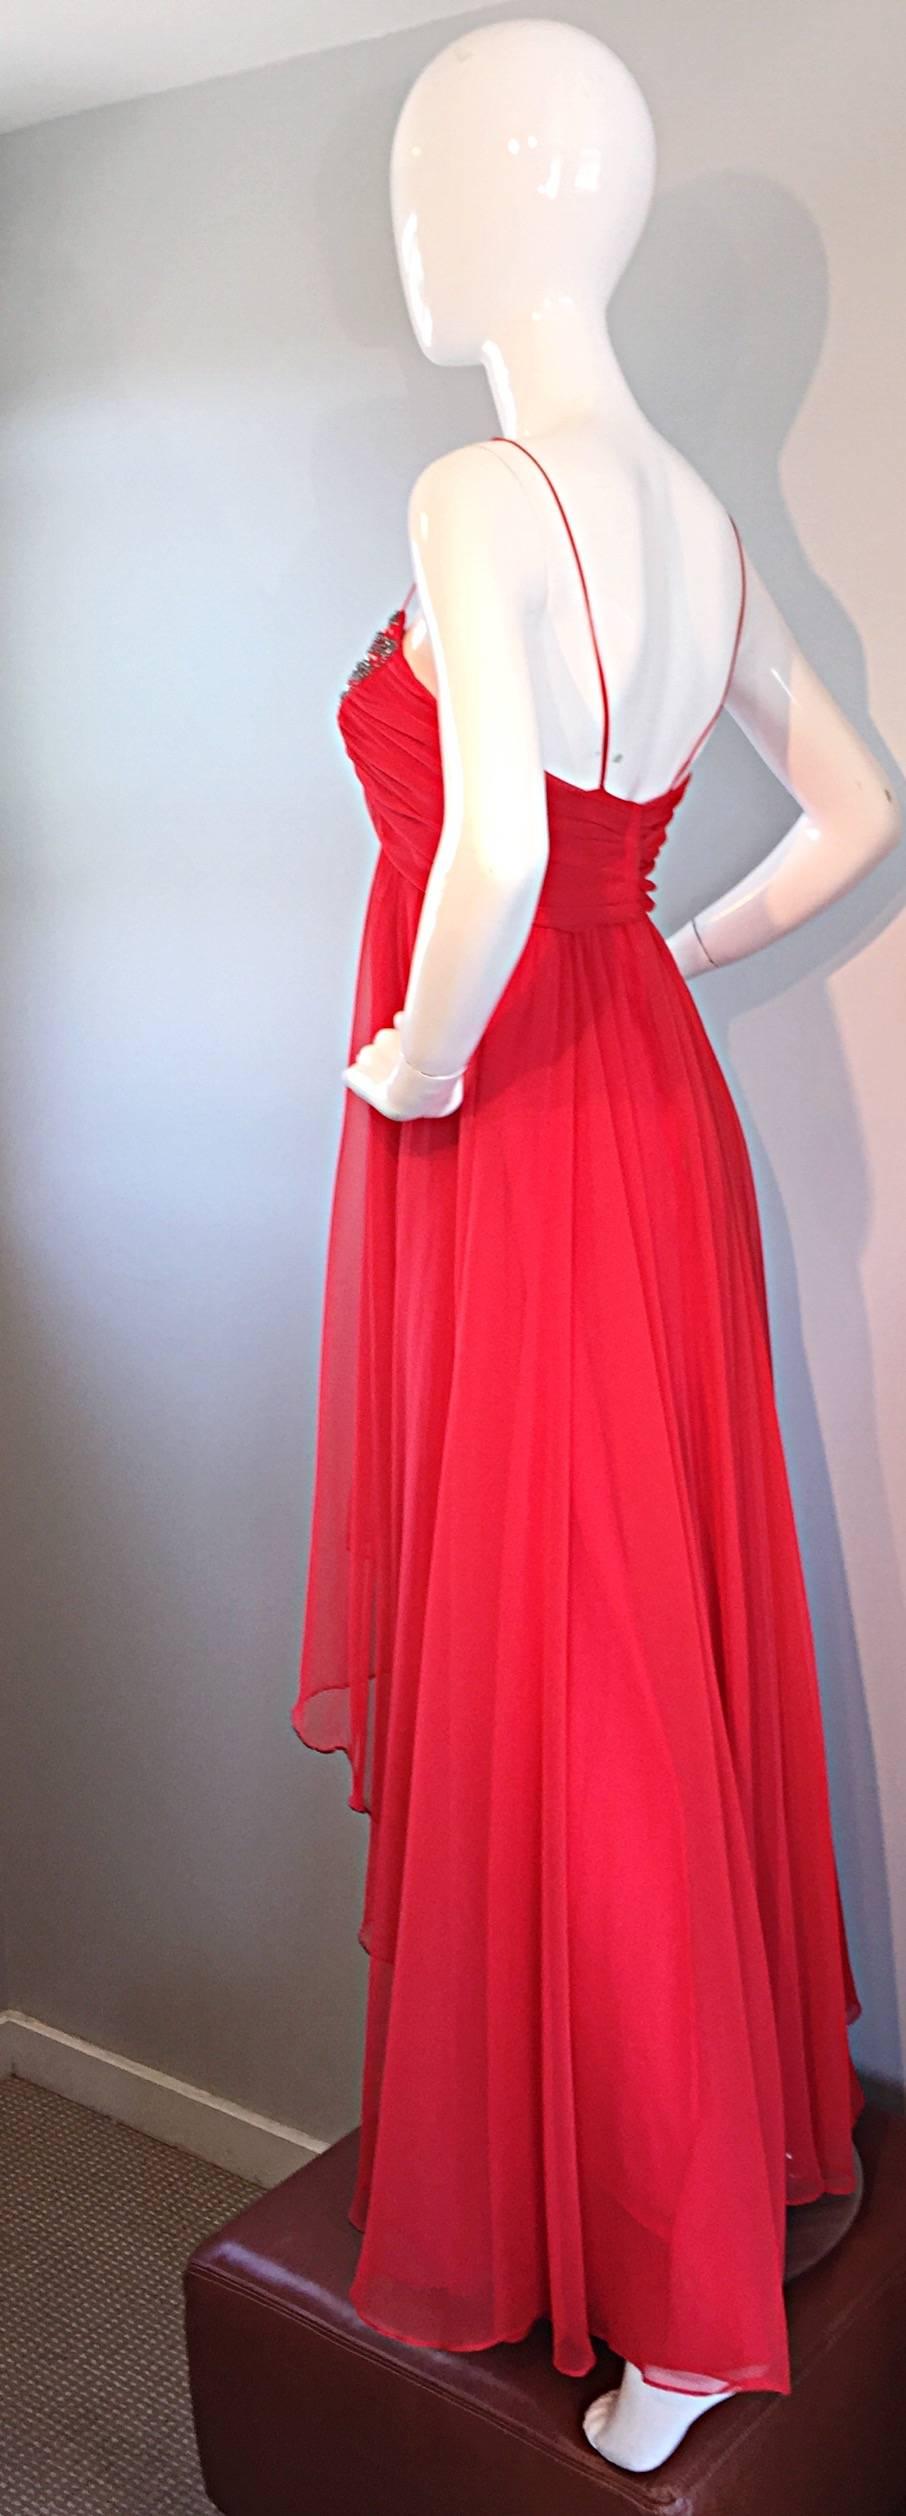 Women's Exquisite 1970s Lipstick Red Chiffon Rhinestone Beaded Vintage 70s Goddess Gown  For Sale